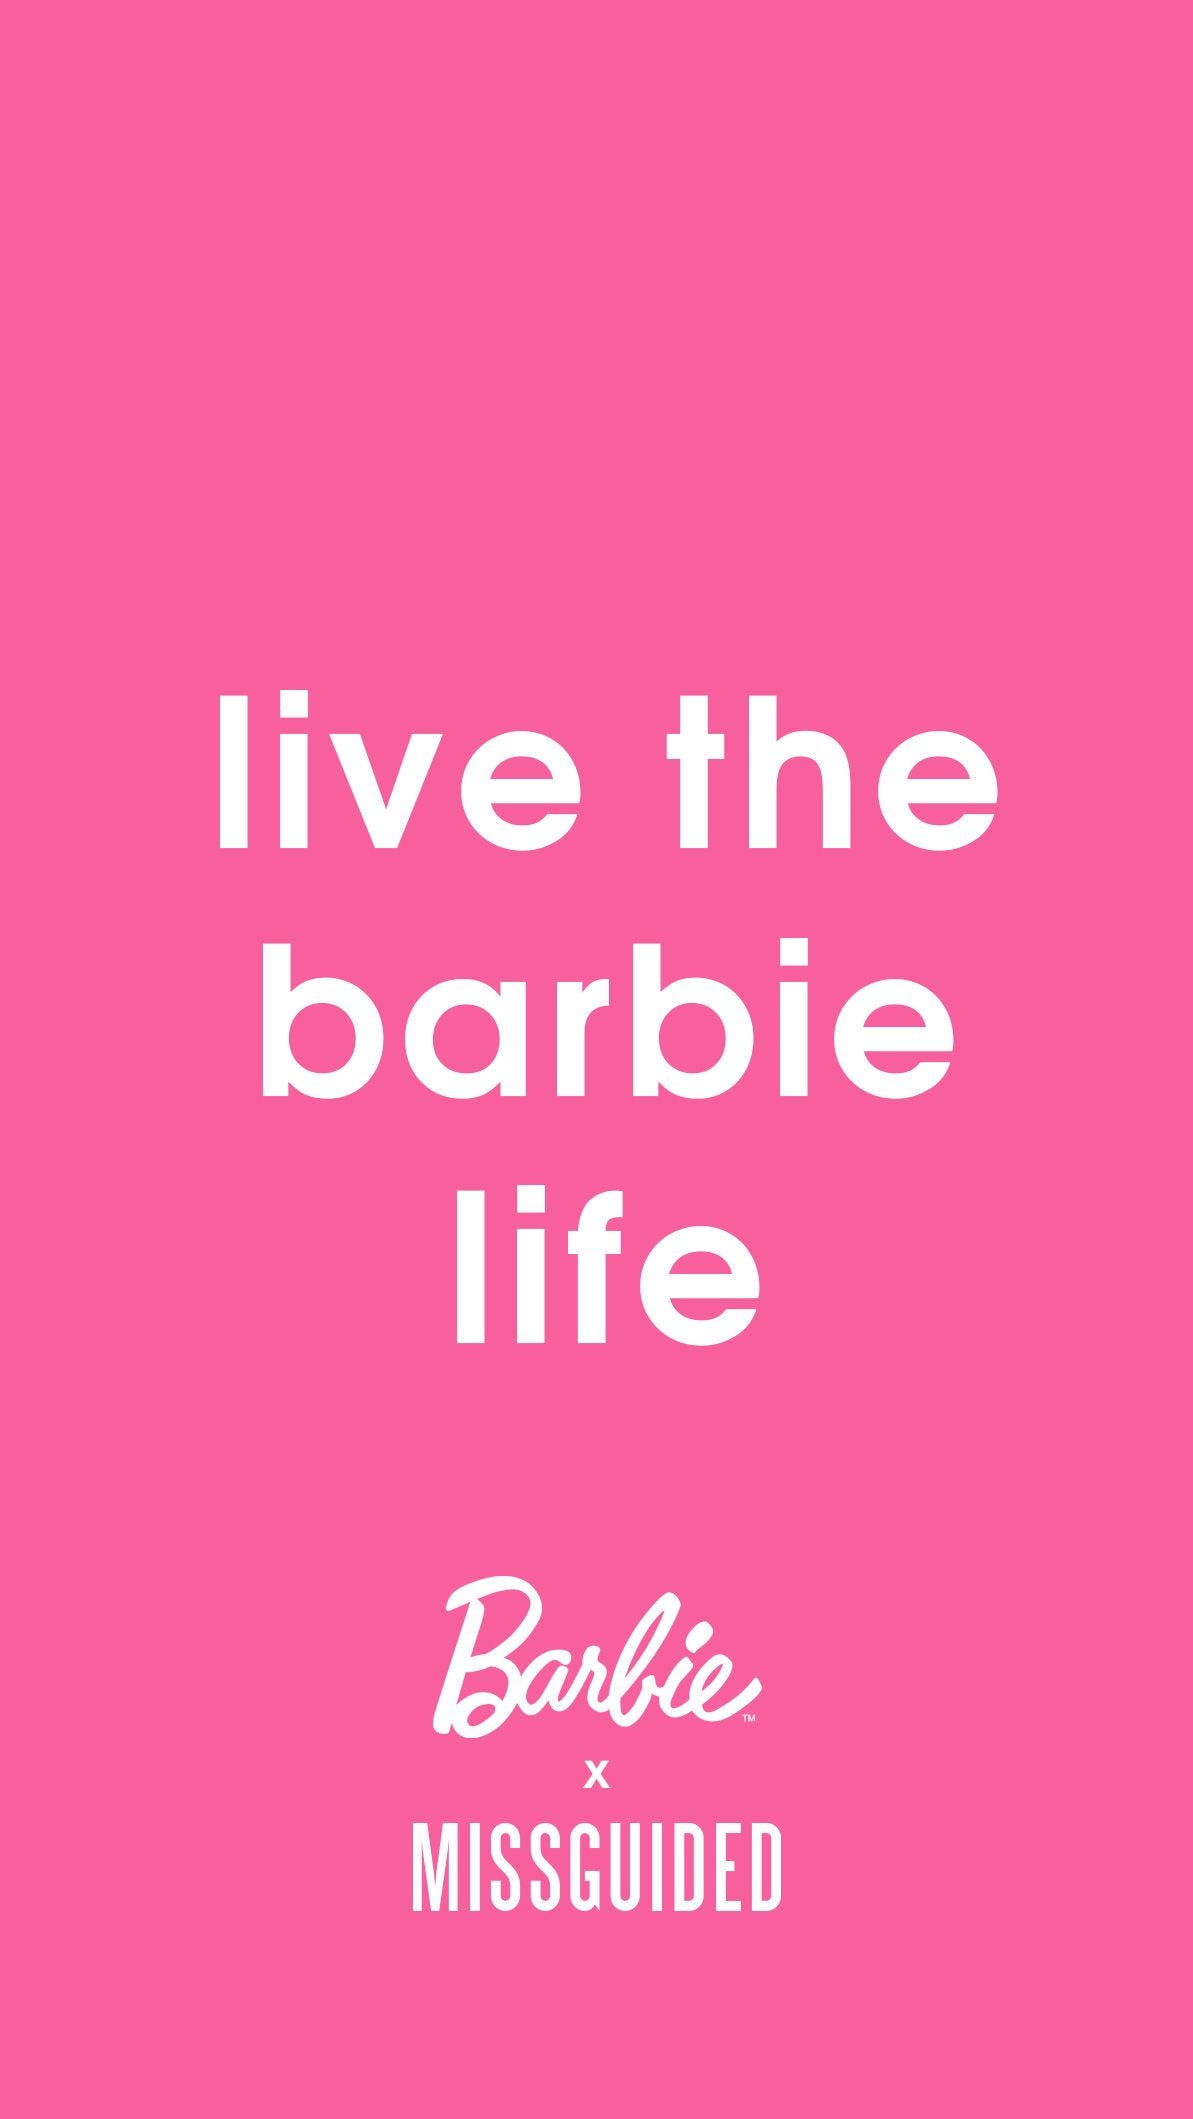 An introduction to Barbie’s persona, key audiences and communities.